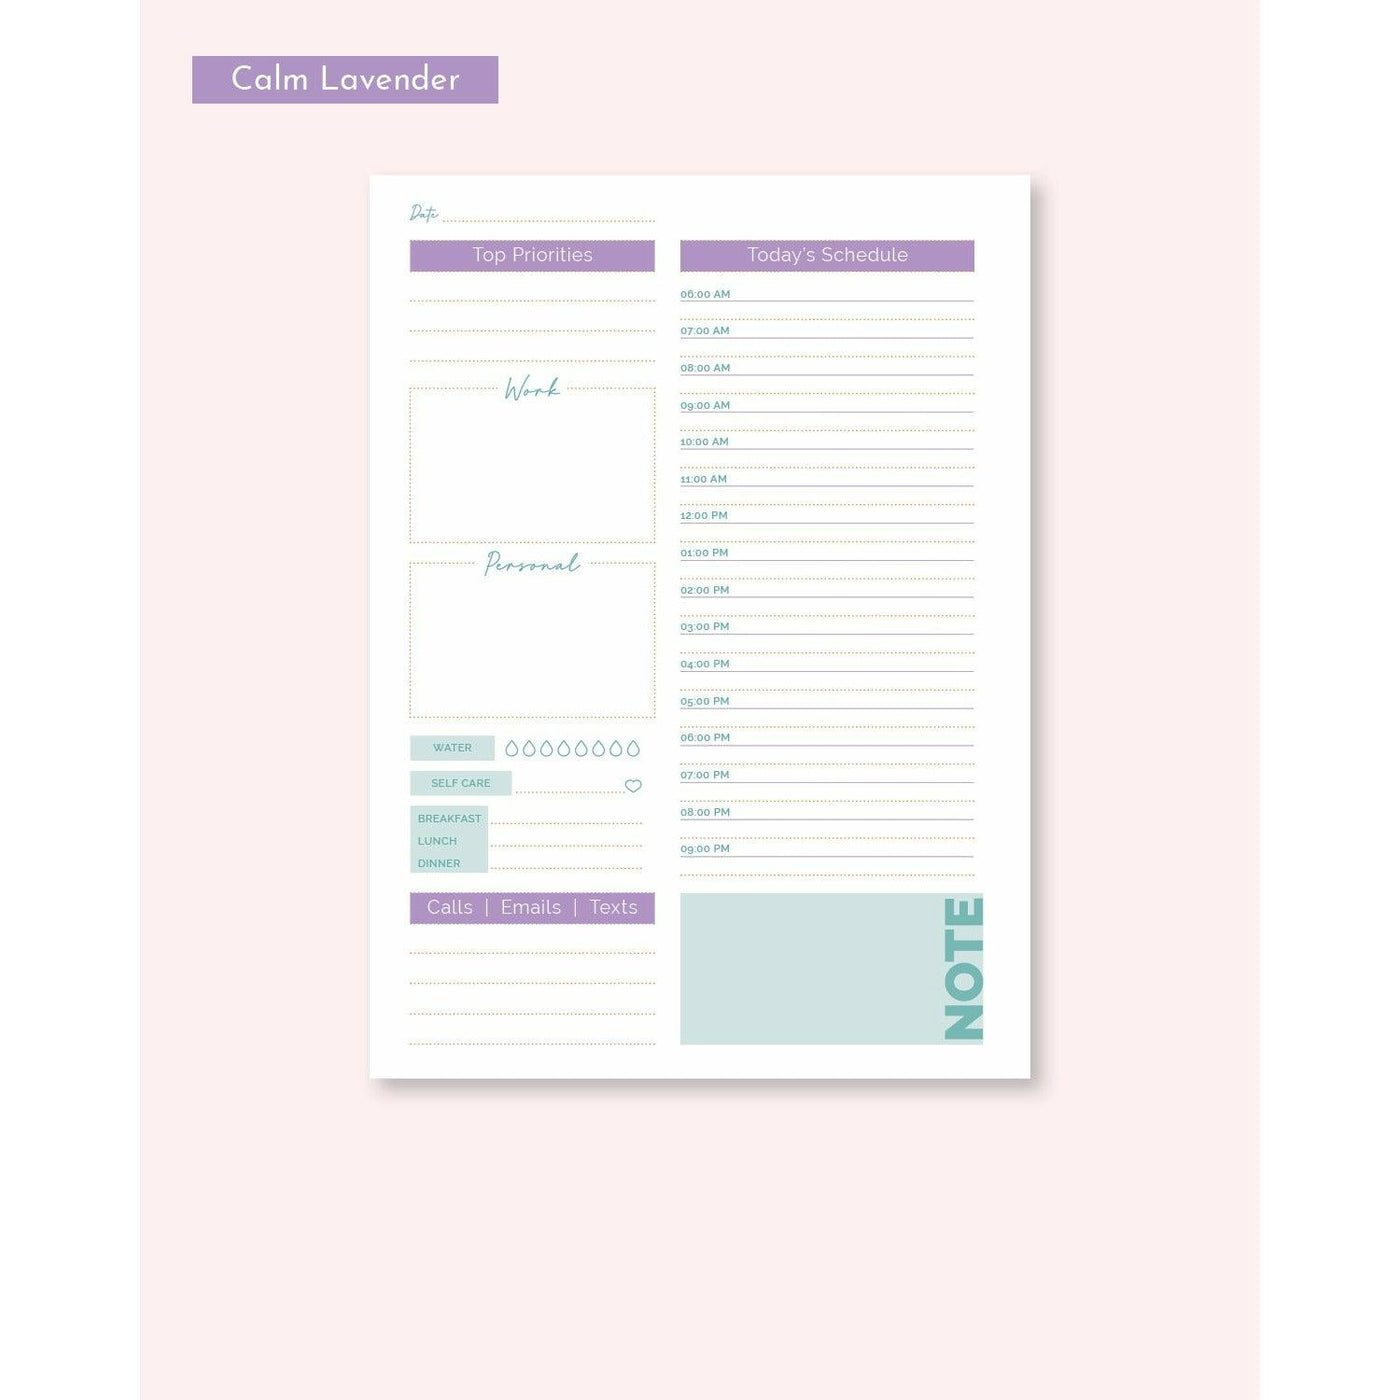 DAILY PLANNER INSERT - CLASSIC SIZE - QUARTERLY SUPPLY by Rongrong DeVoe- Calm Lavender